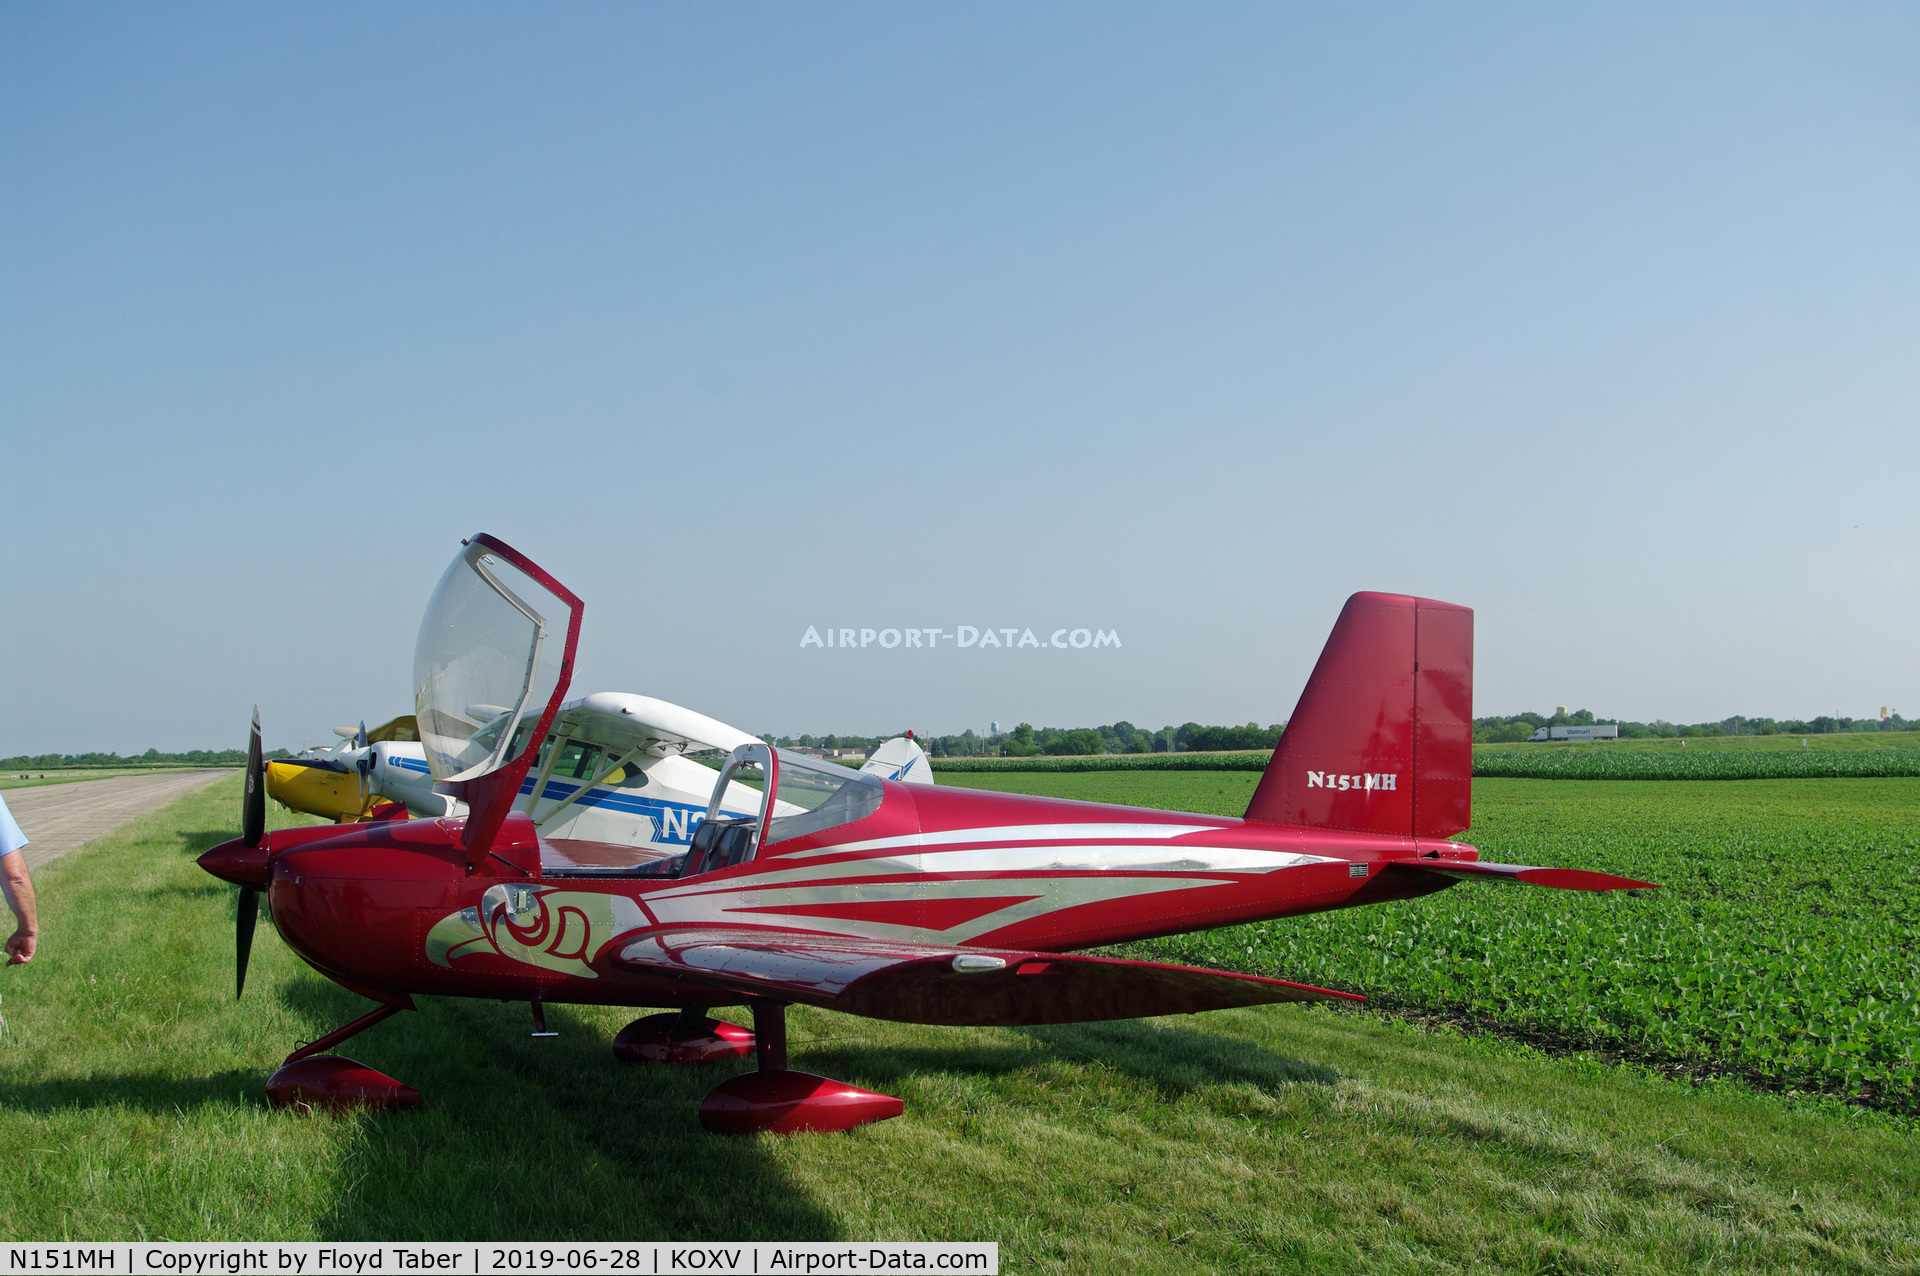 N151MH, 2014 Vans RV-12 C/N 120755, Visitor at the Ercoupe owners convention